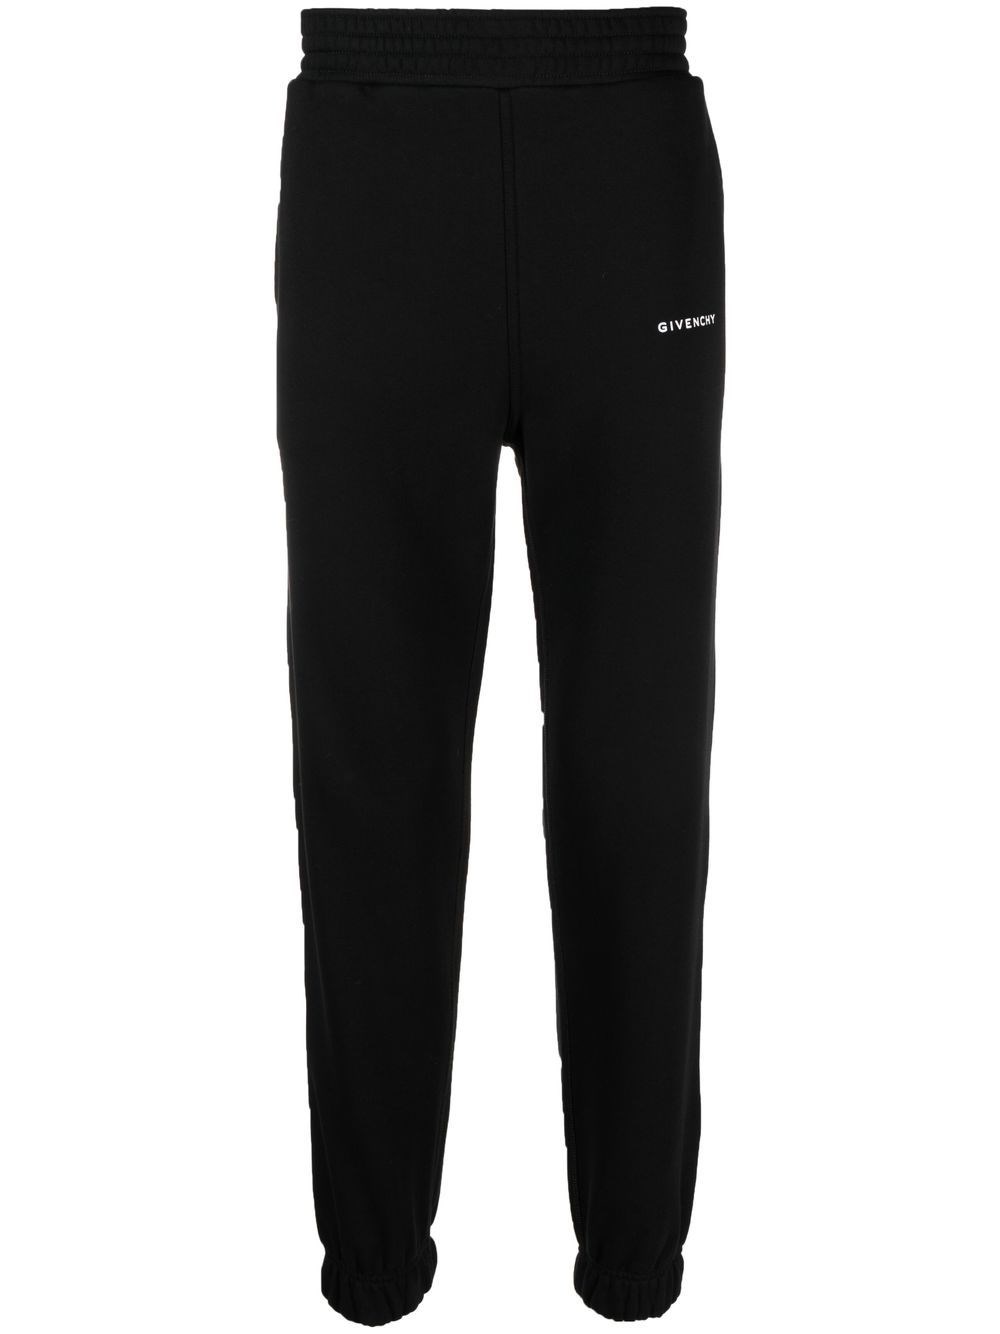 GIVENCHY SLIM FIT TRACK PANTS